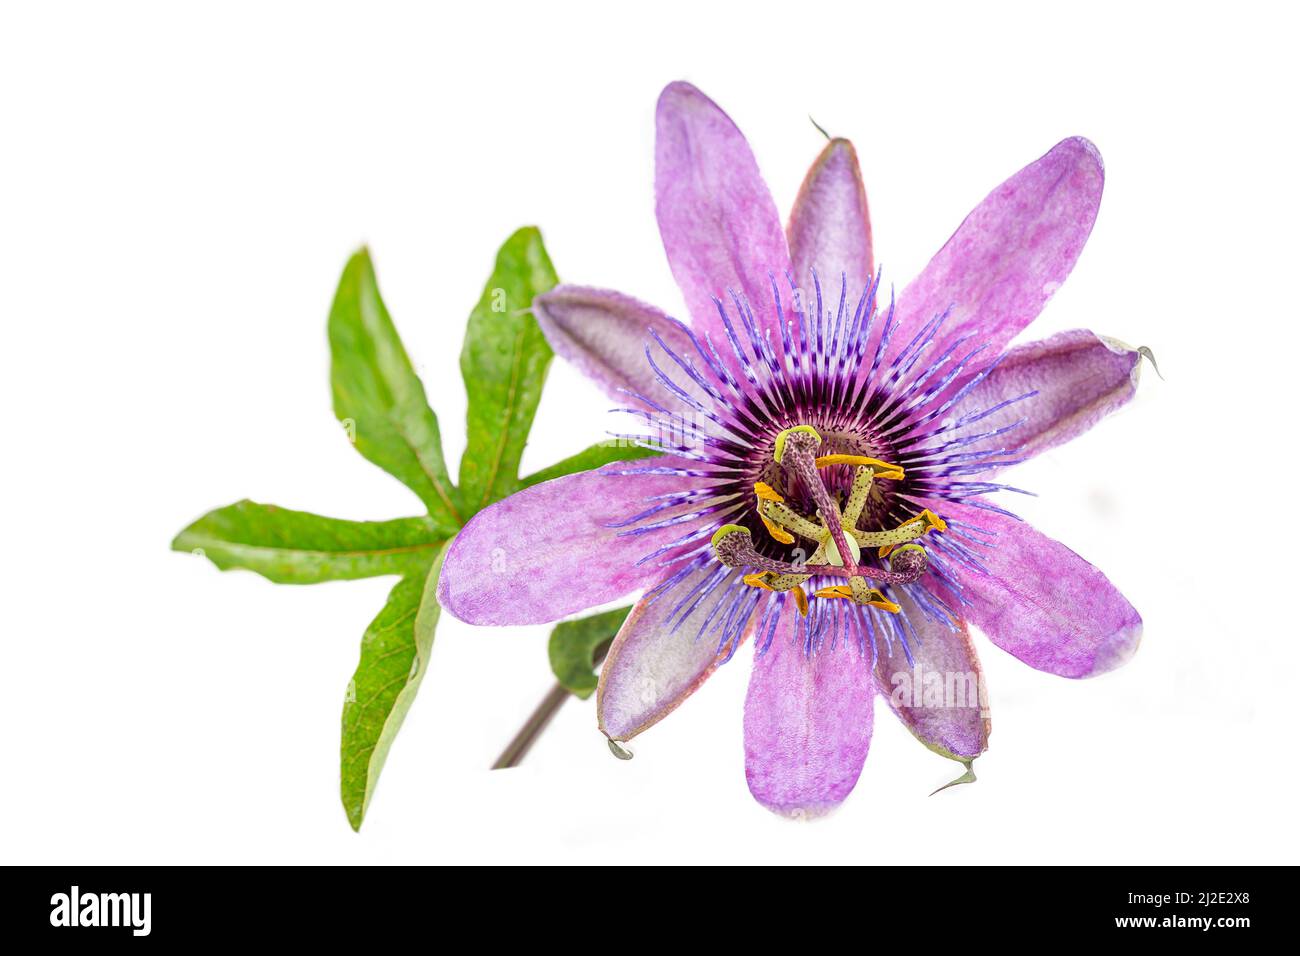 Passionflower - medicinal flower Stock Photo